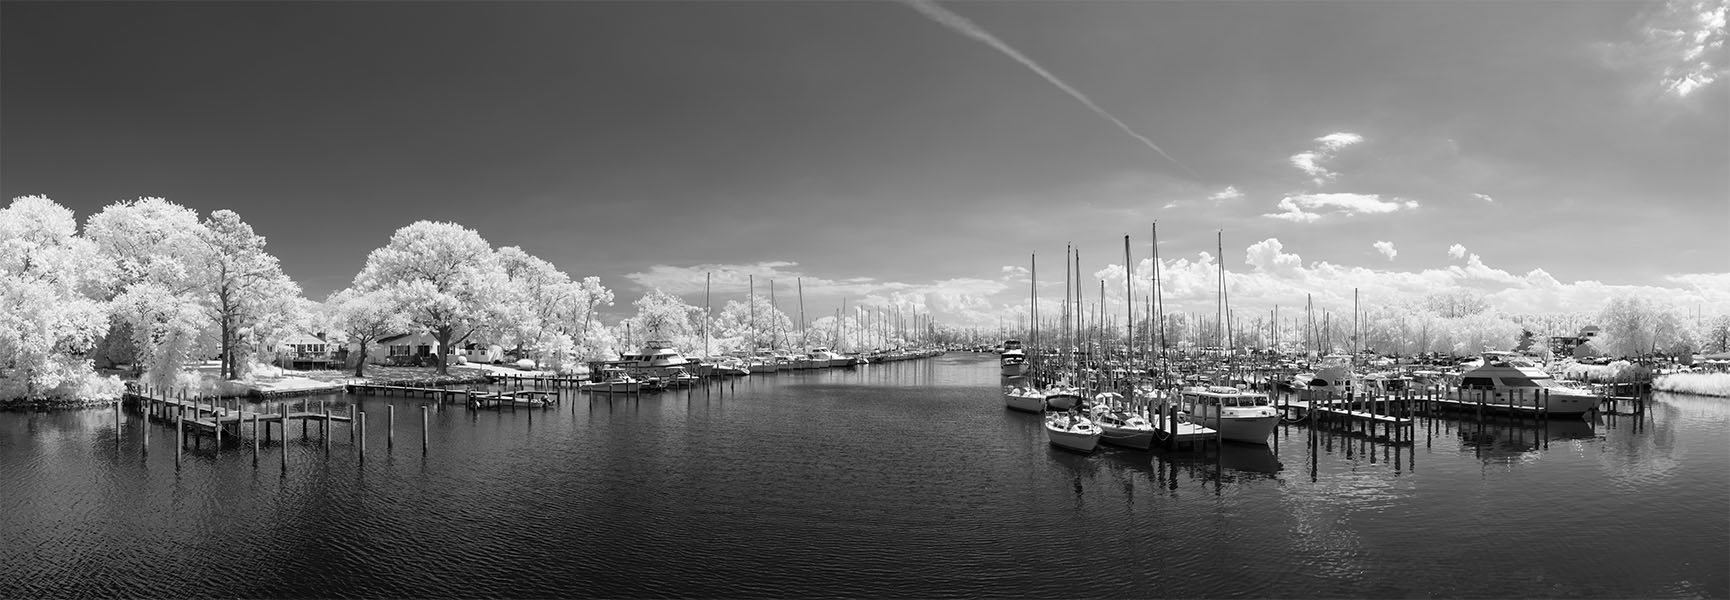 Infrared Panoramic Photograph of a River with Crowded Docks and Marinas on Each Side.